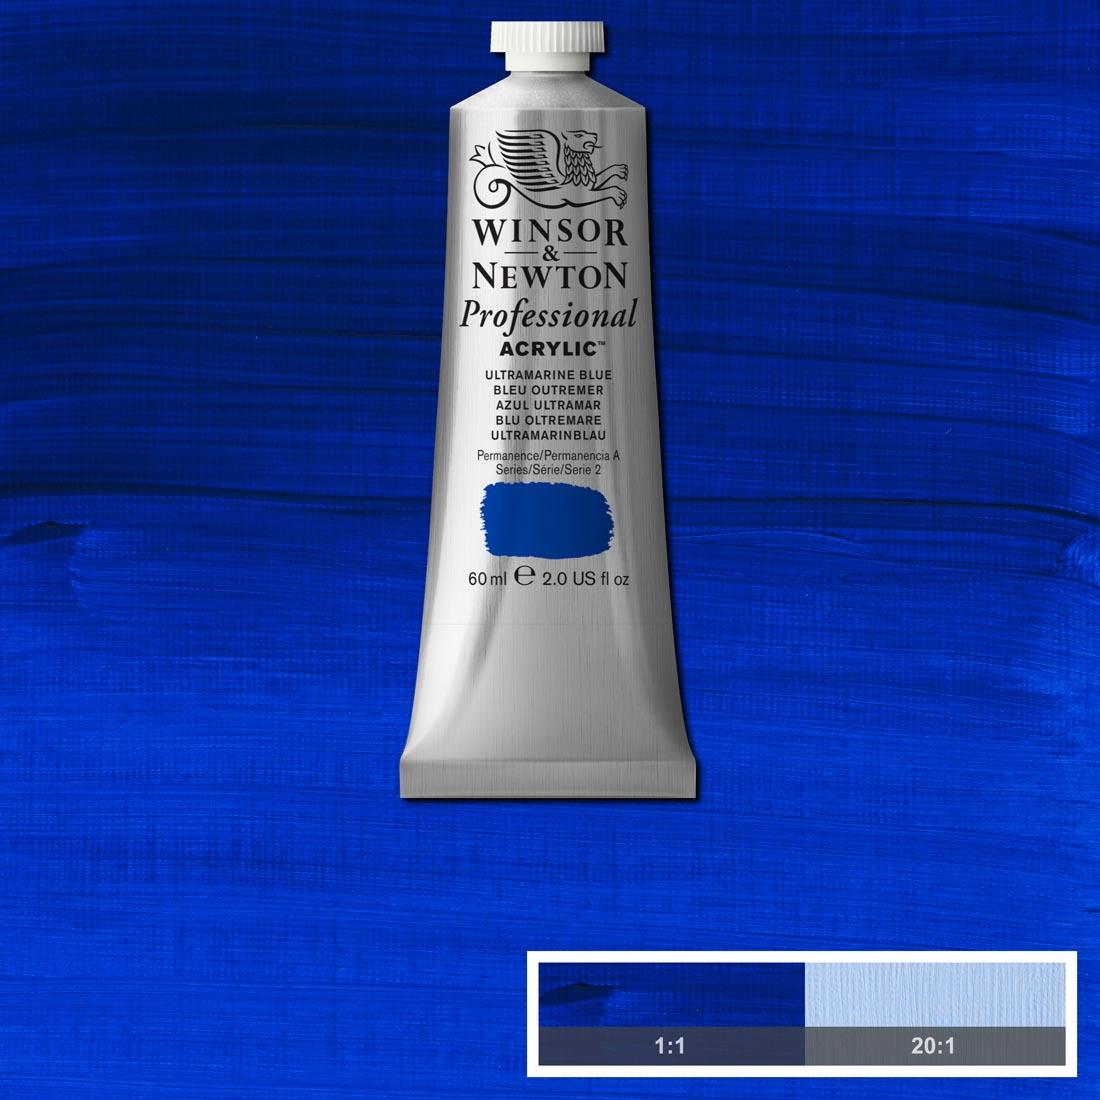 Tube of Ultramarine Blue Winsor and Newton Professional Acrylic with paint swatch in the background